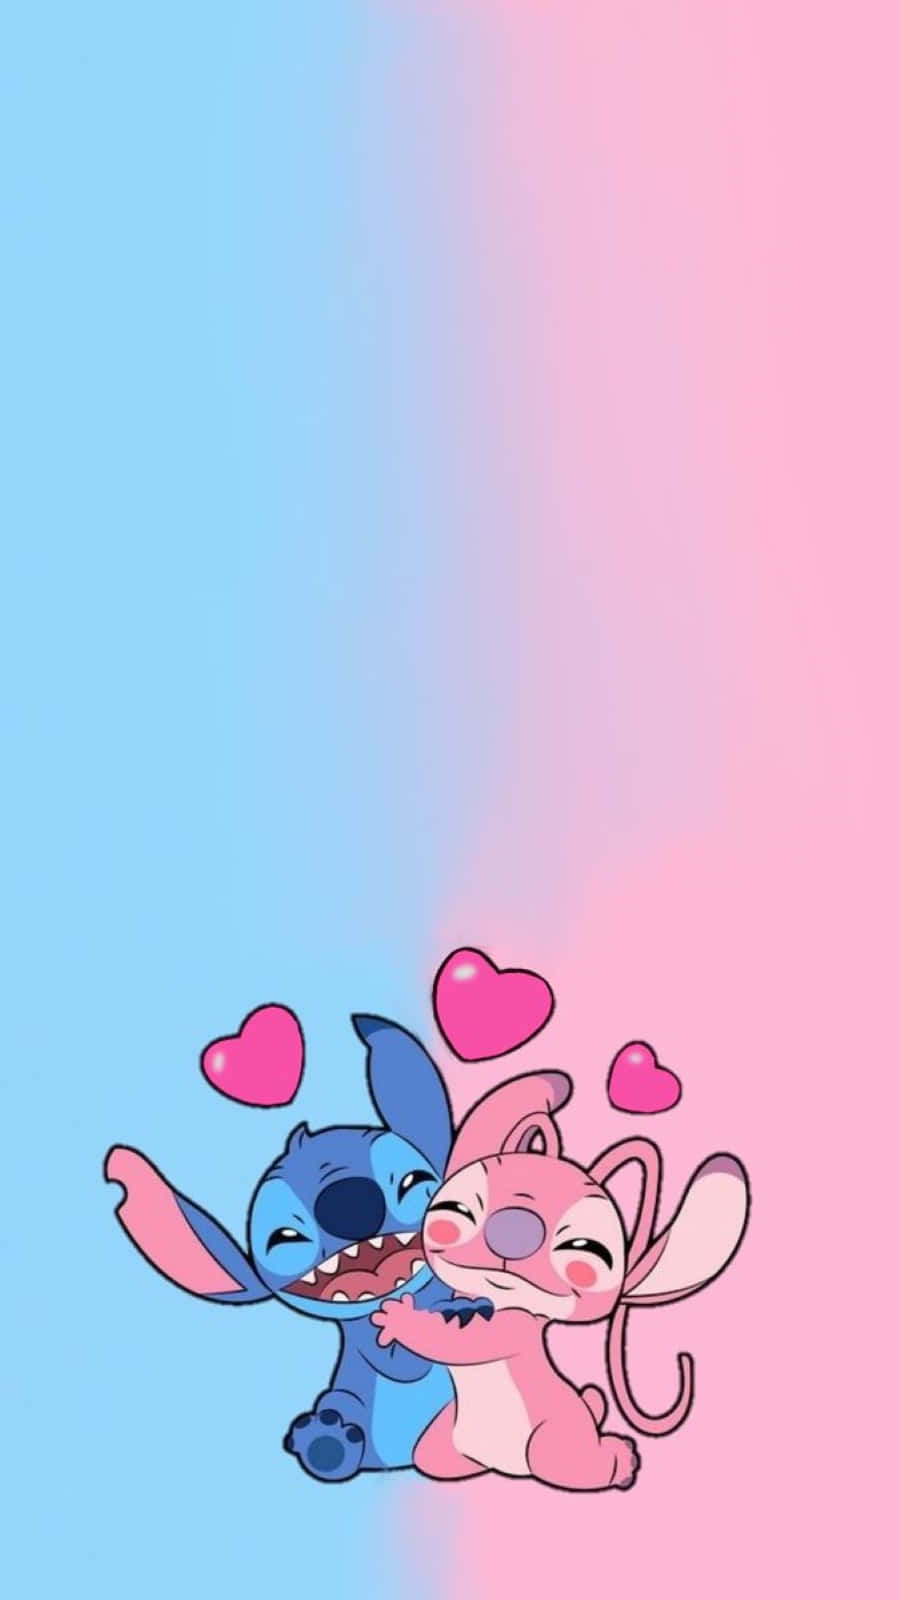 Love Stitch and Angel Embracing in a Tender Hug Wallpaper